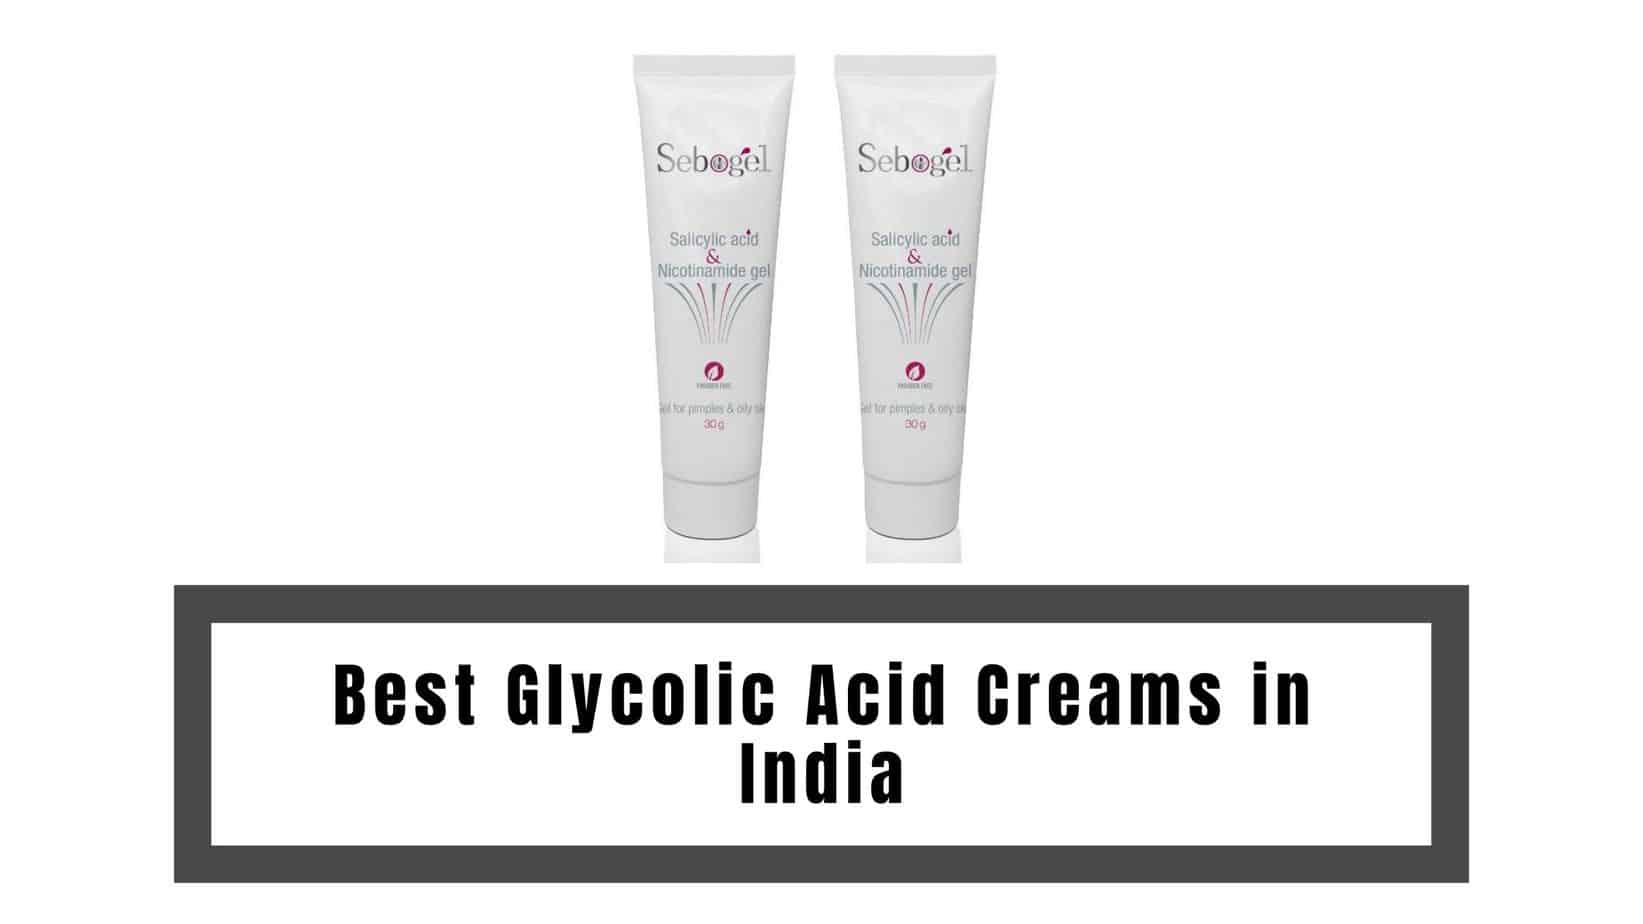 Best Glycolic Acid Creams in India